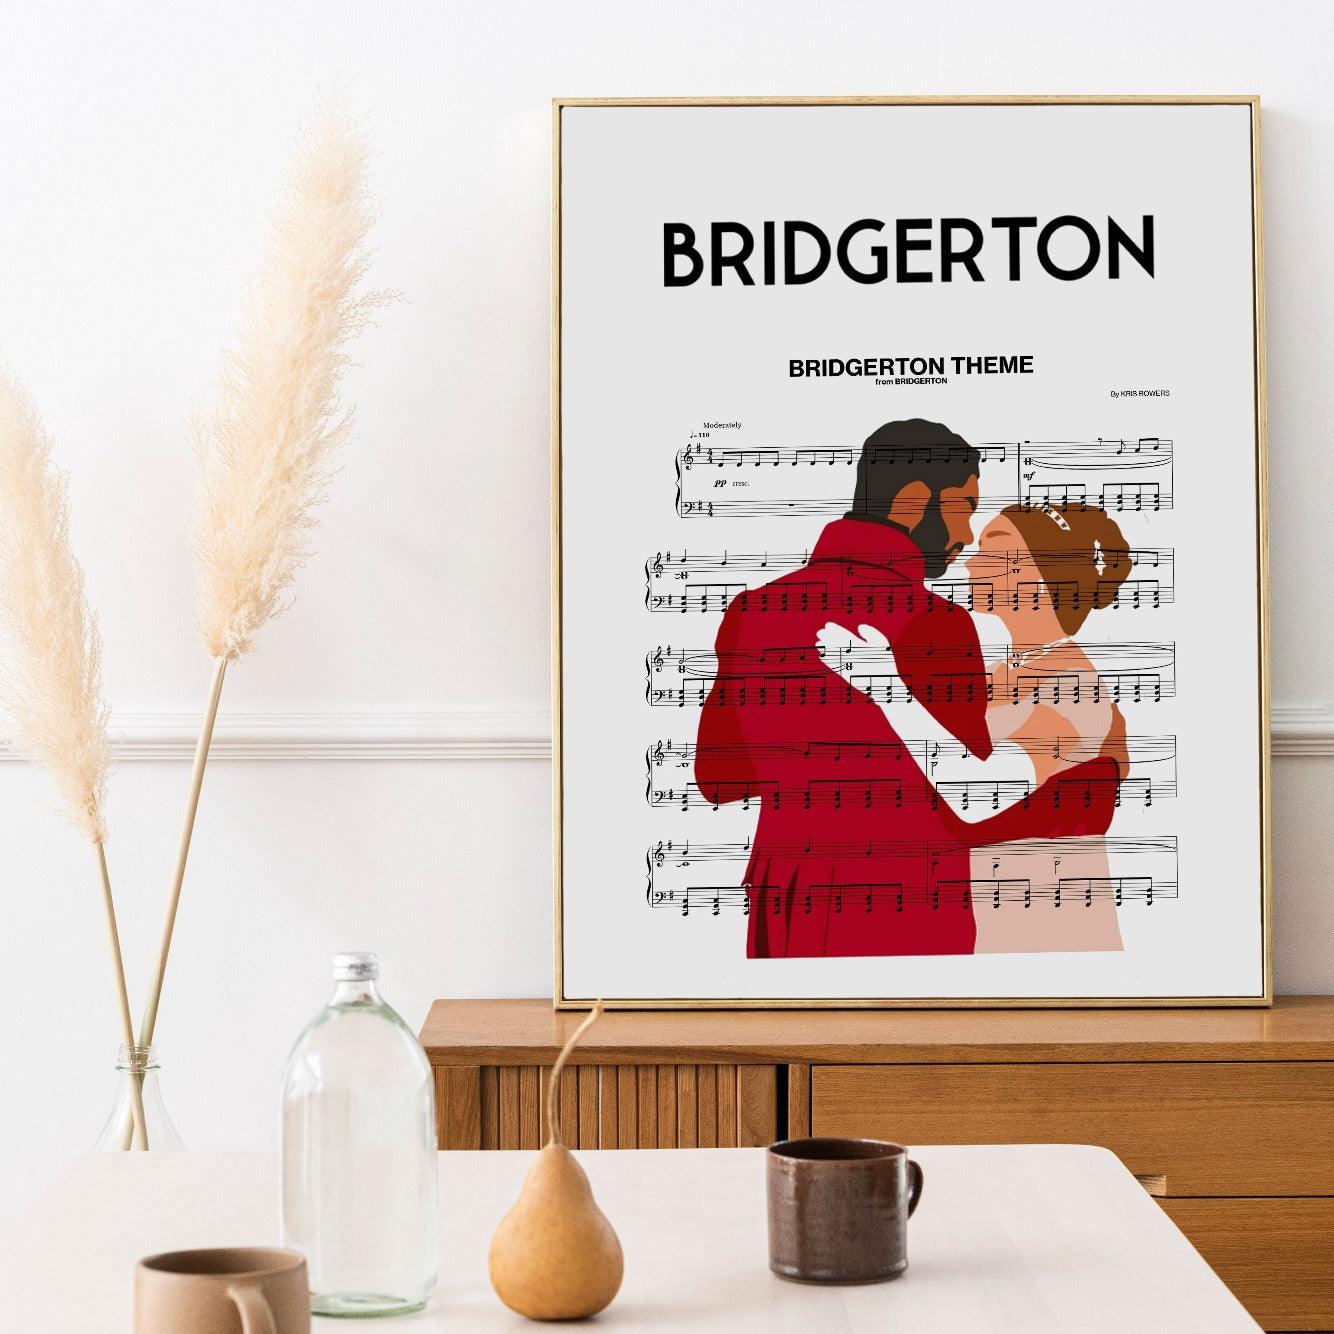 Bring the stunning music of Bridgerton to your walls with this exquisite Main Theme Poster. This one-of-a-kind design from 98Types Music is hand-crafted and designed to perfectly encapsulate everything that makes Bridgerton so special. Whether it's the effortless beauty or the sweeping romance, this poster turns its iconic lyrics into art that you can bring home. With an array of options available, this poster ensures you'll never forget the timelessness of Bridgerton.